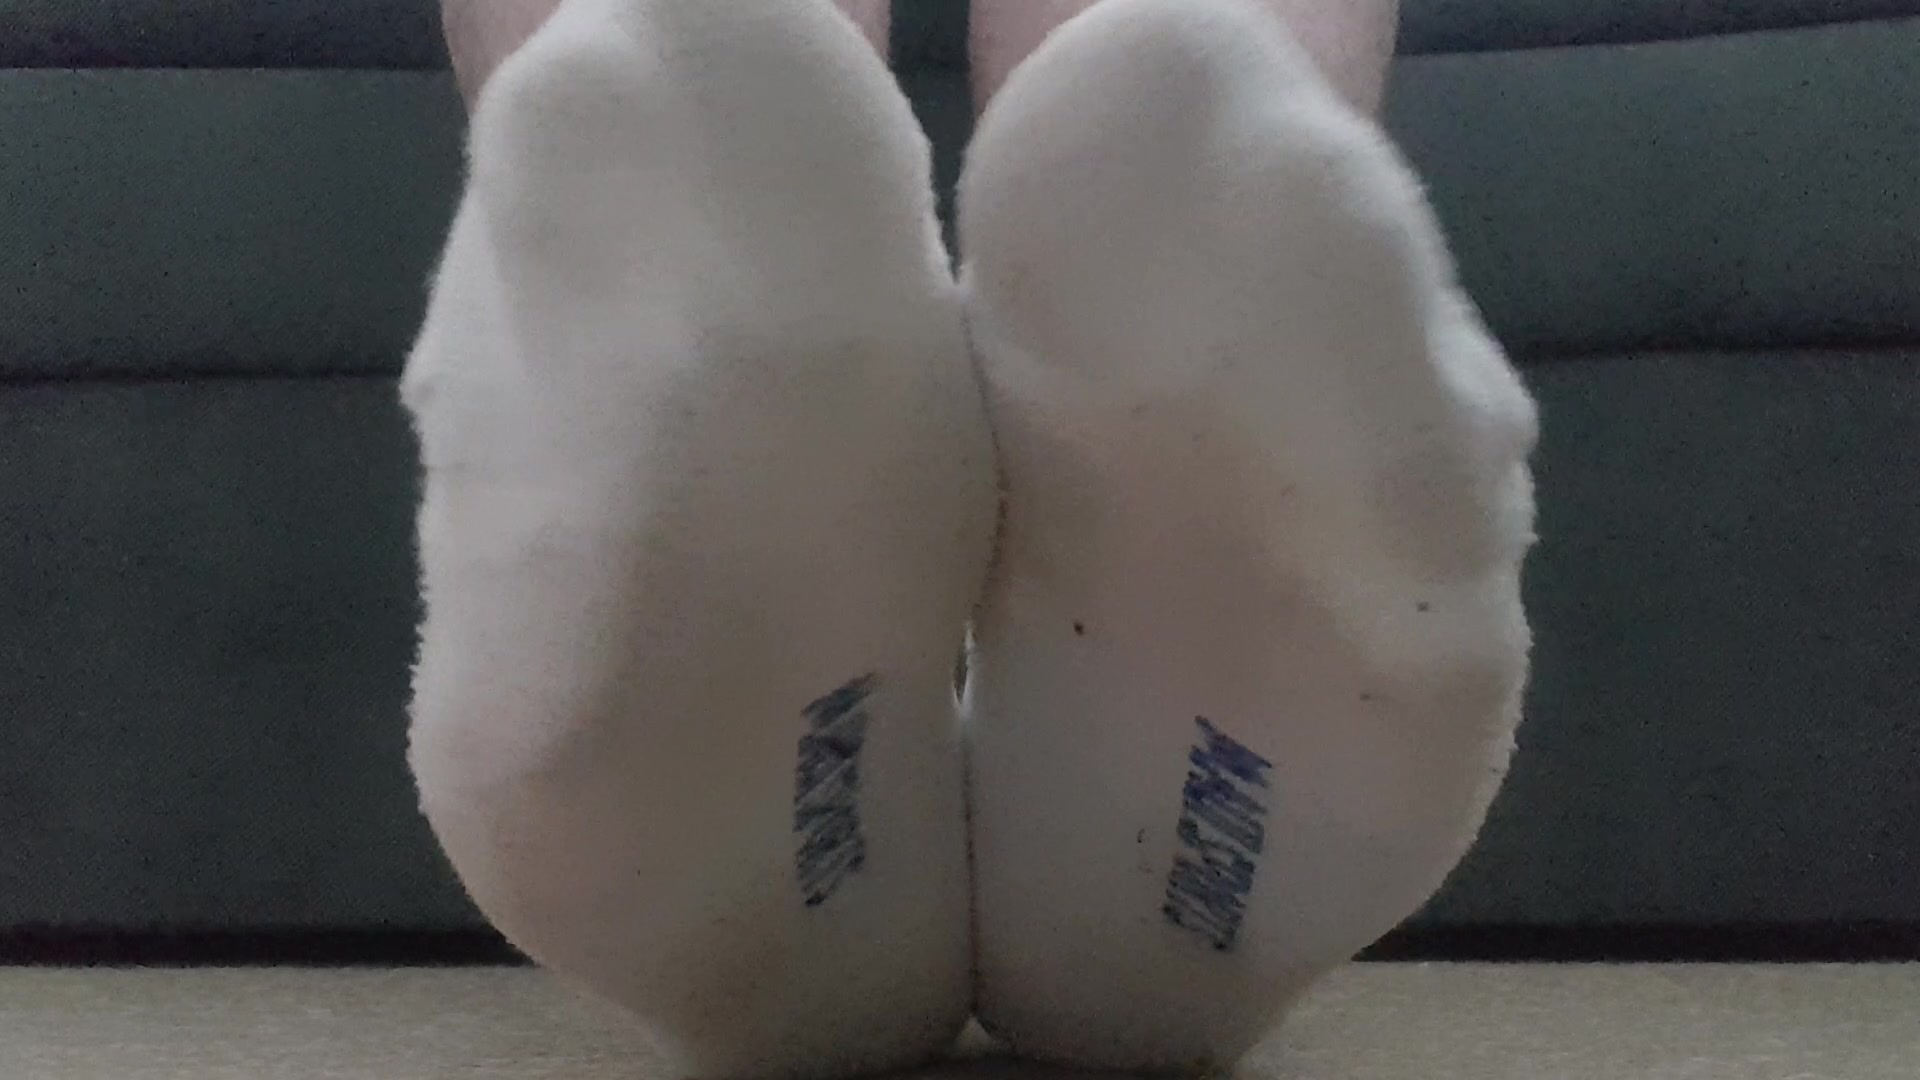 Dirty socks and feet after workout 1/2